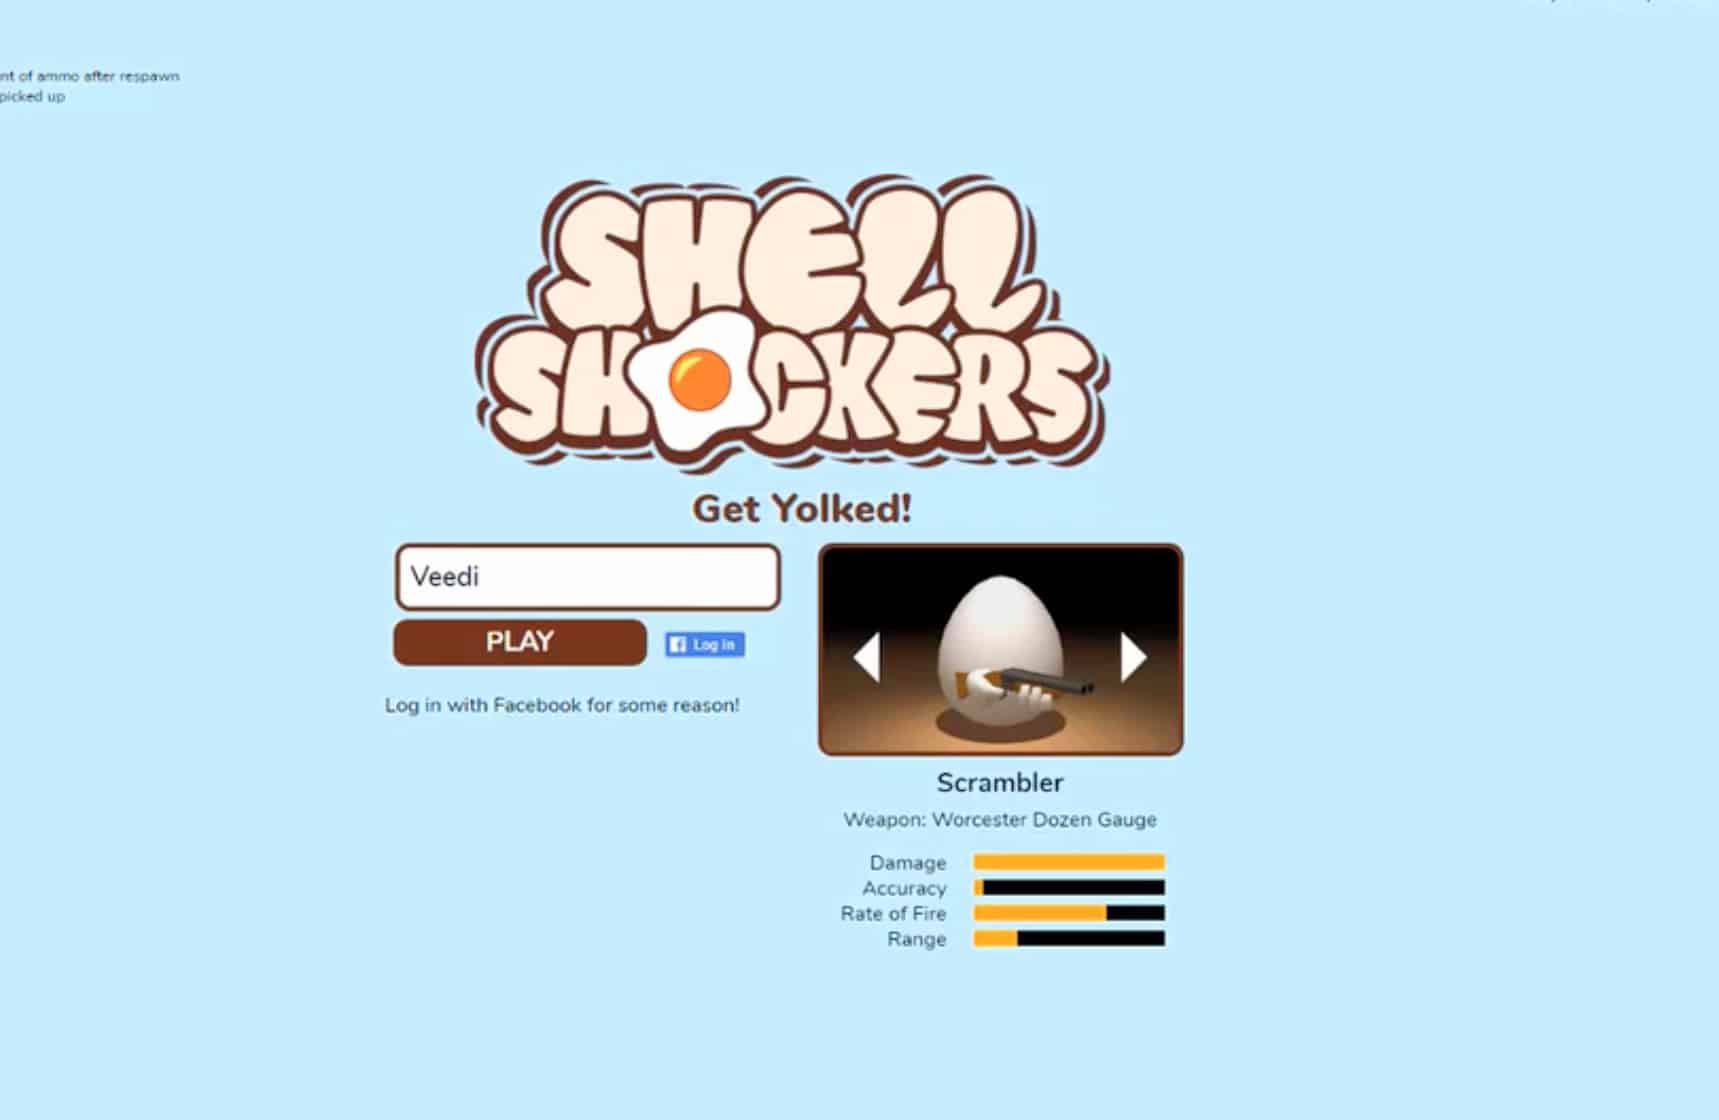 Shell Shockers - First-person shooter game - Shell Shockers HD Gameplay 